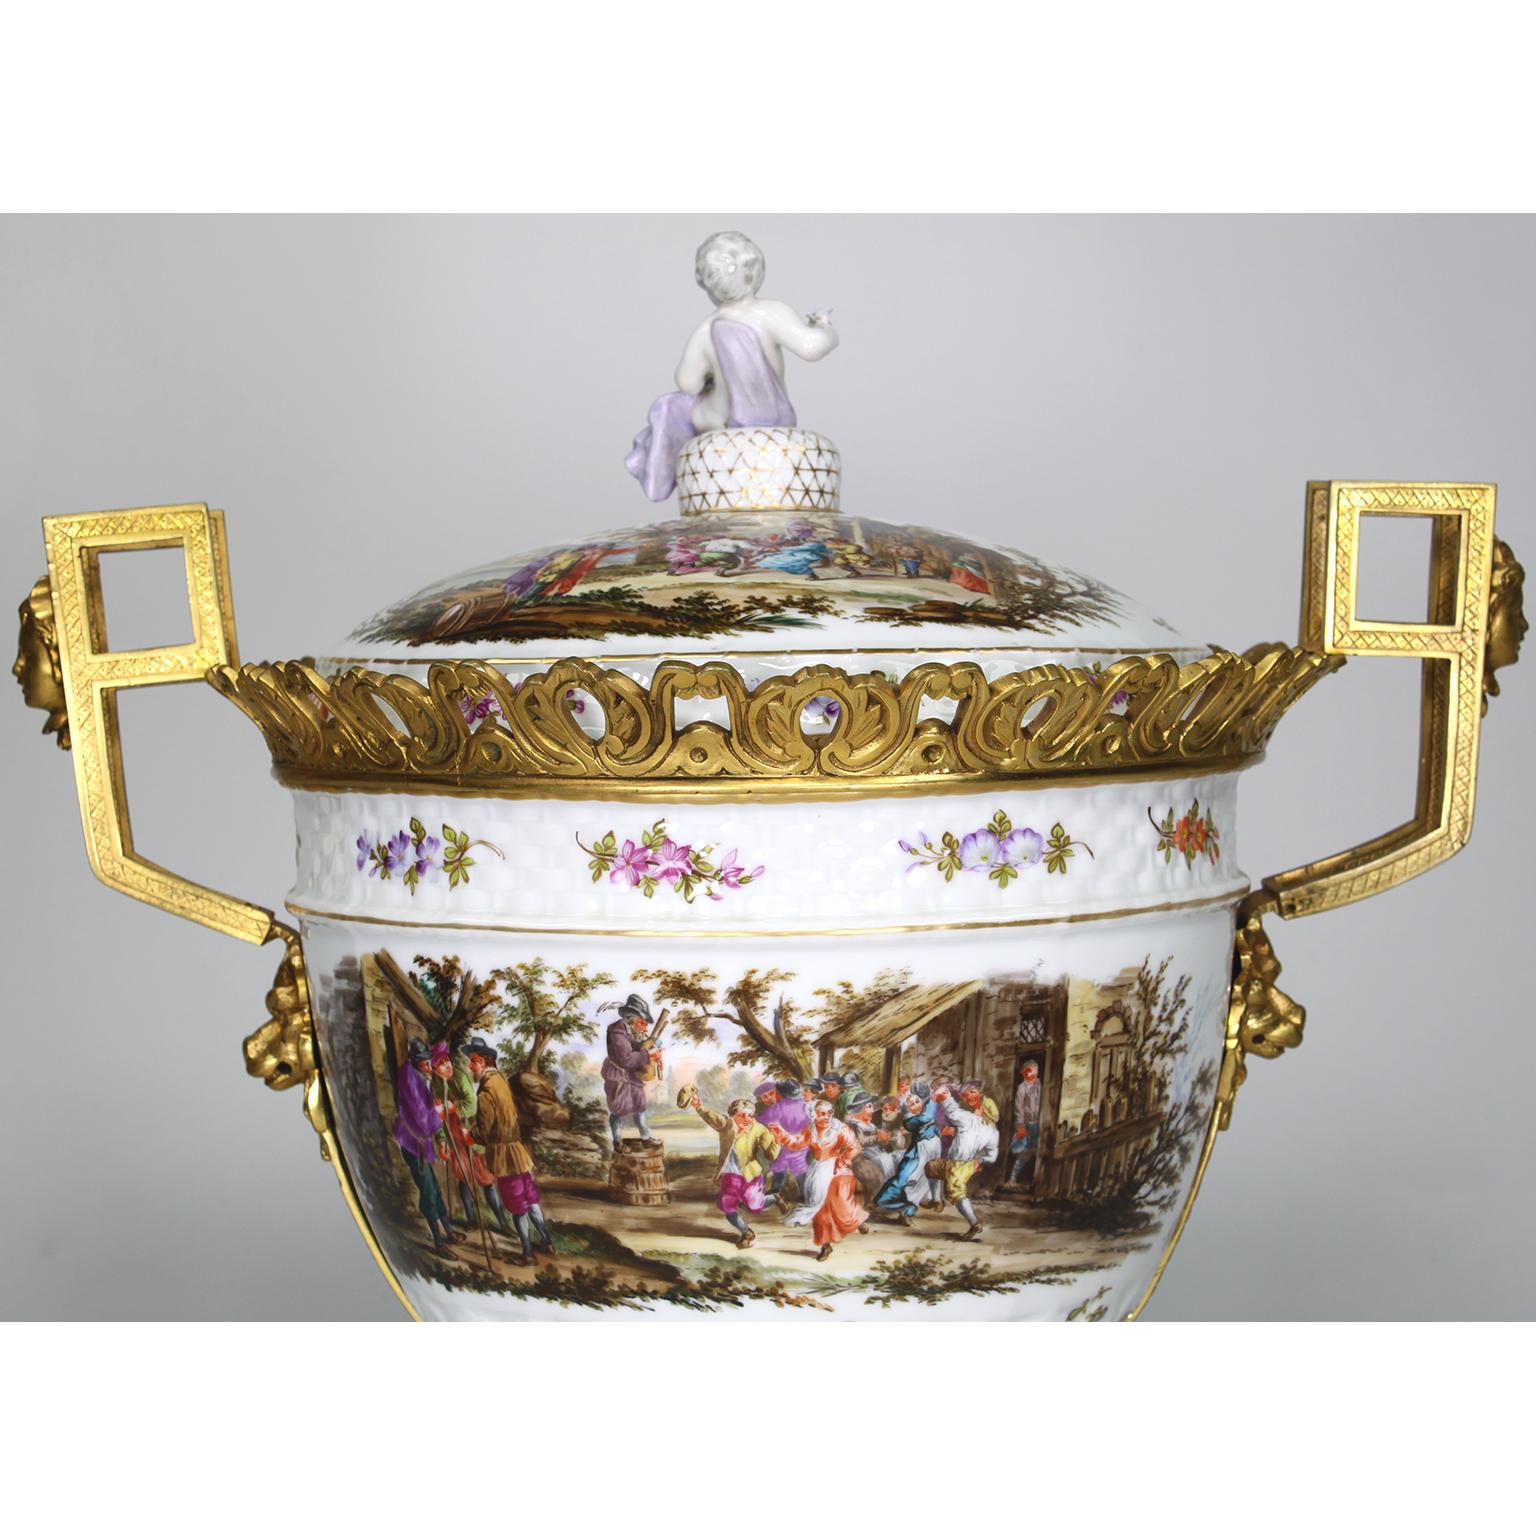 Large German Porcelain & Gilt-Bronze Mounted Urn with Cover in Manner of Meissen For Sale 6